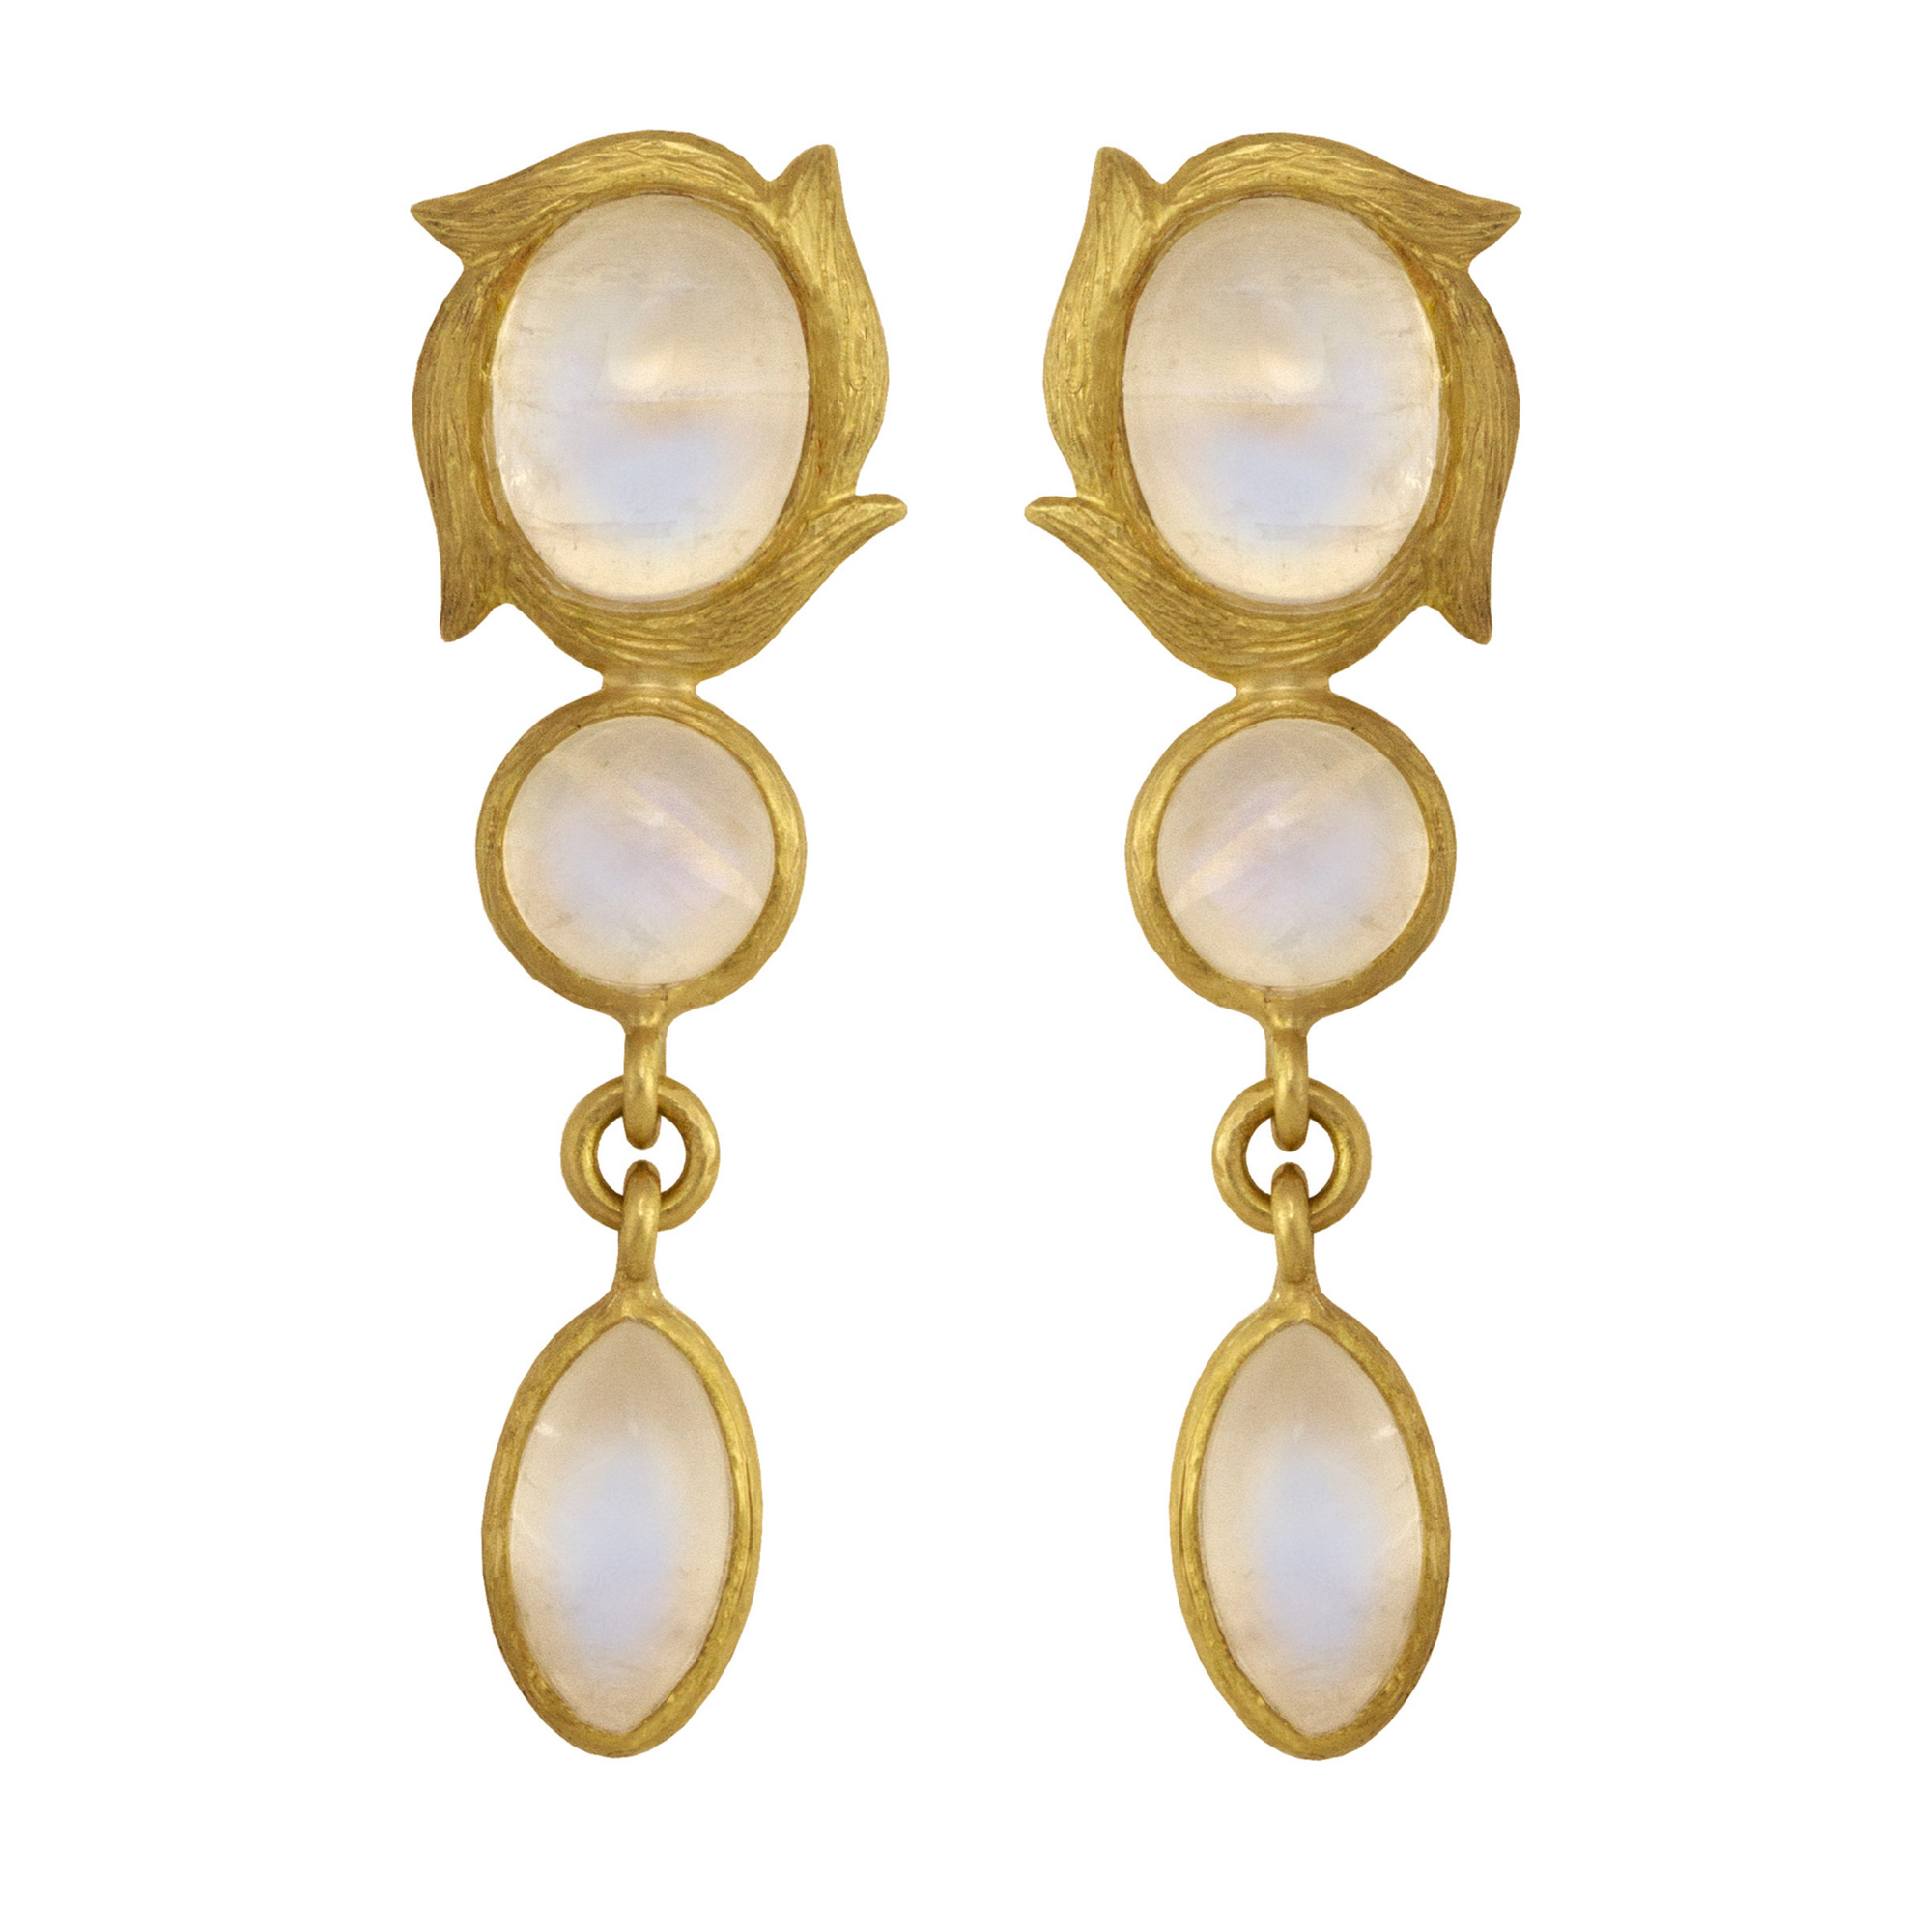  Rainbow Moonstone Vine Drop Earrings Laurie Kaiser available at Talisman Collection Fine Jewelers in El Dorado Hills, CA and online. Featuring three cabochon rainbow moonstones framed in 18k yellow gold, these earrings make a statement while maintaining a sleek and minimalistic design.